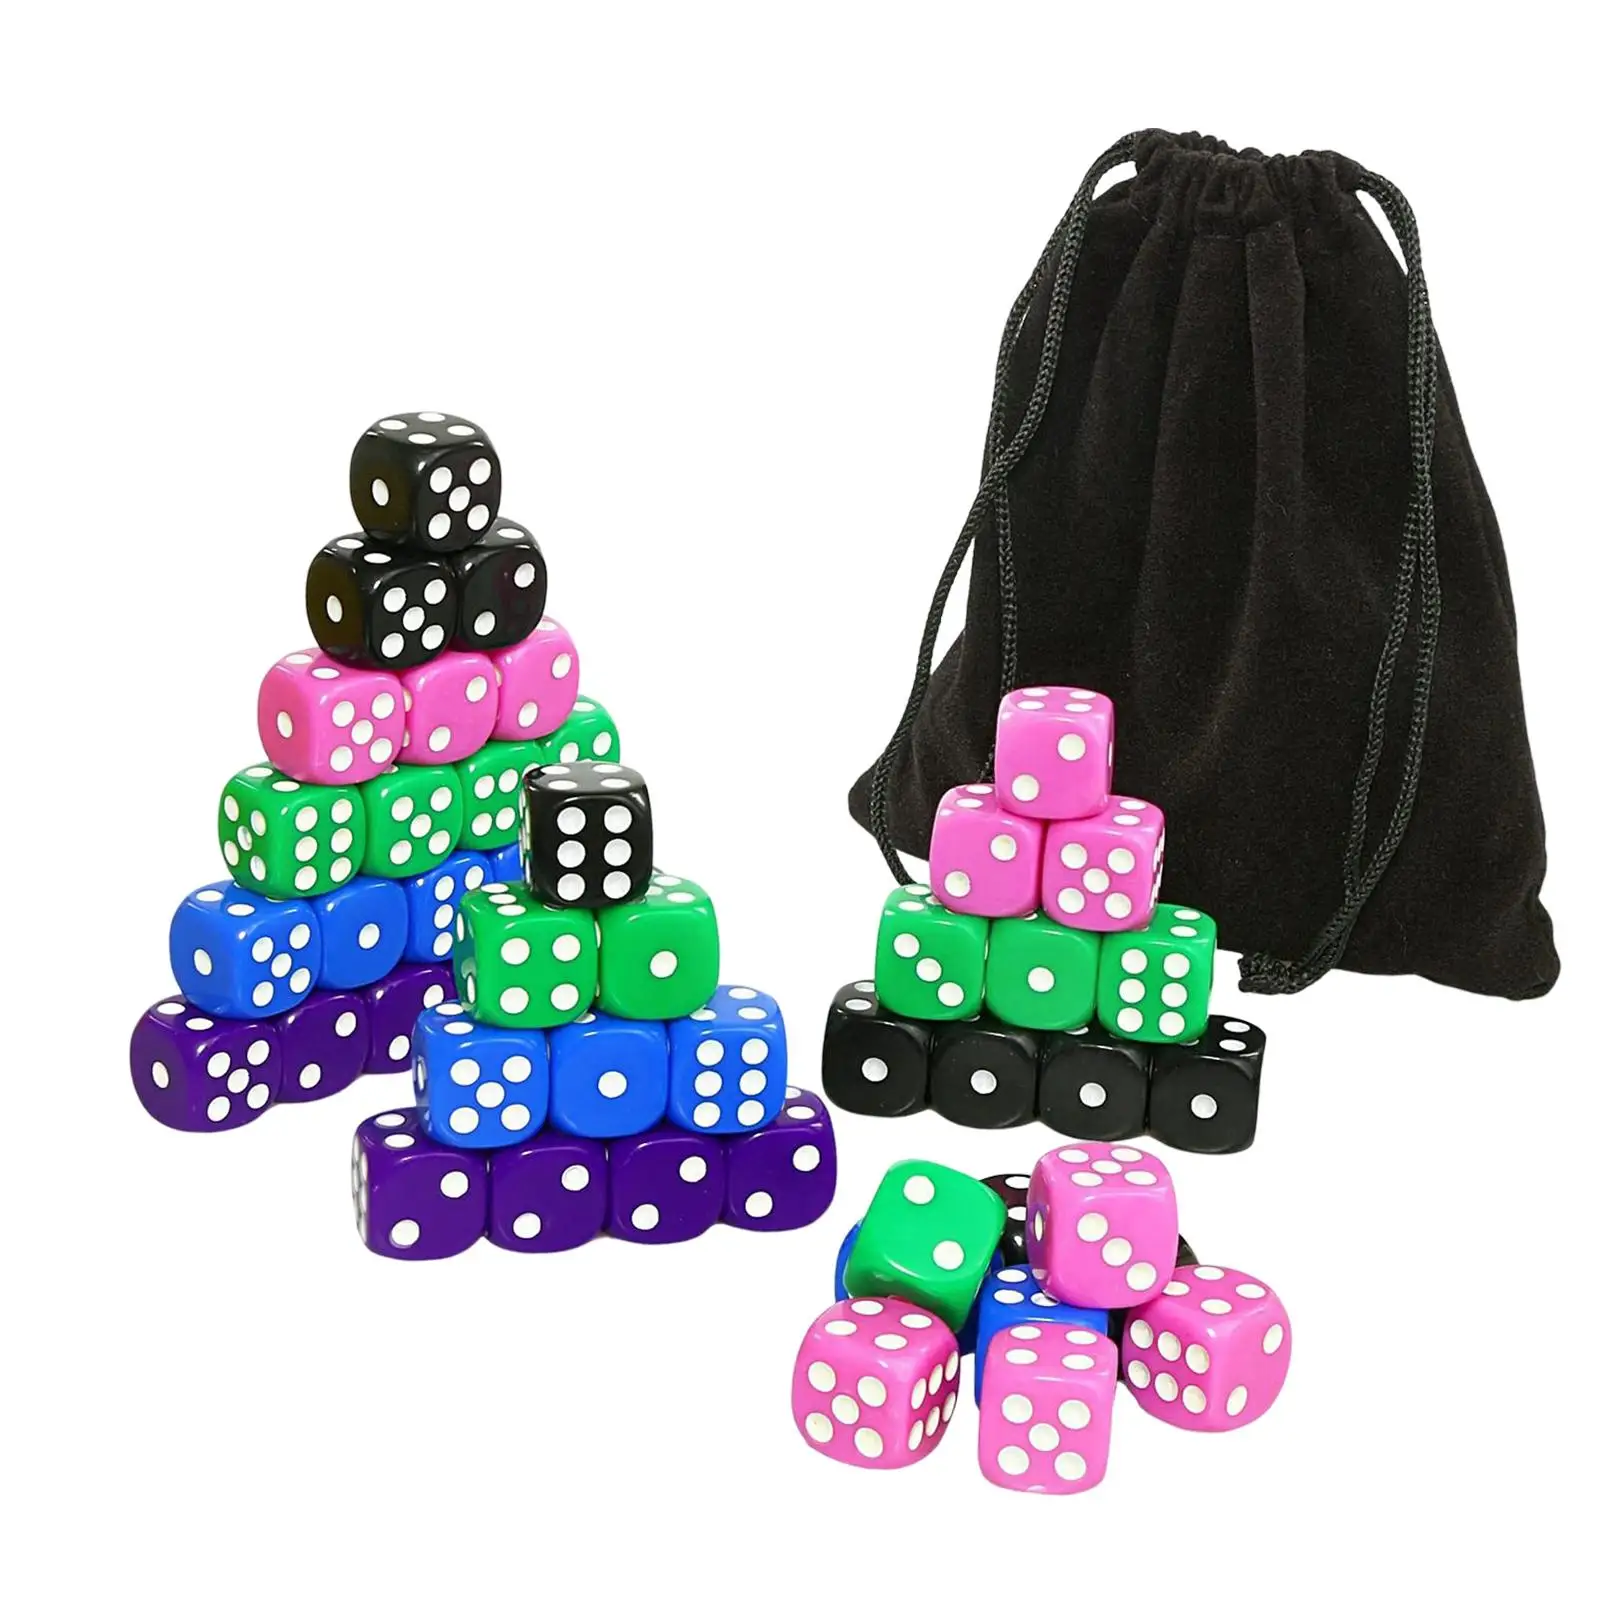 50pcs D6 6 Sided Dice Set with Drawstring Dice Bag for MTG RPG Bar Toys, 16mm Acrylic Dice, Table Games, Role Playing Games